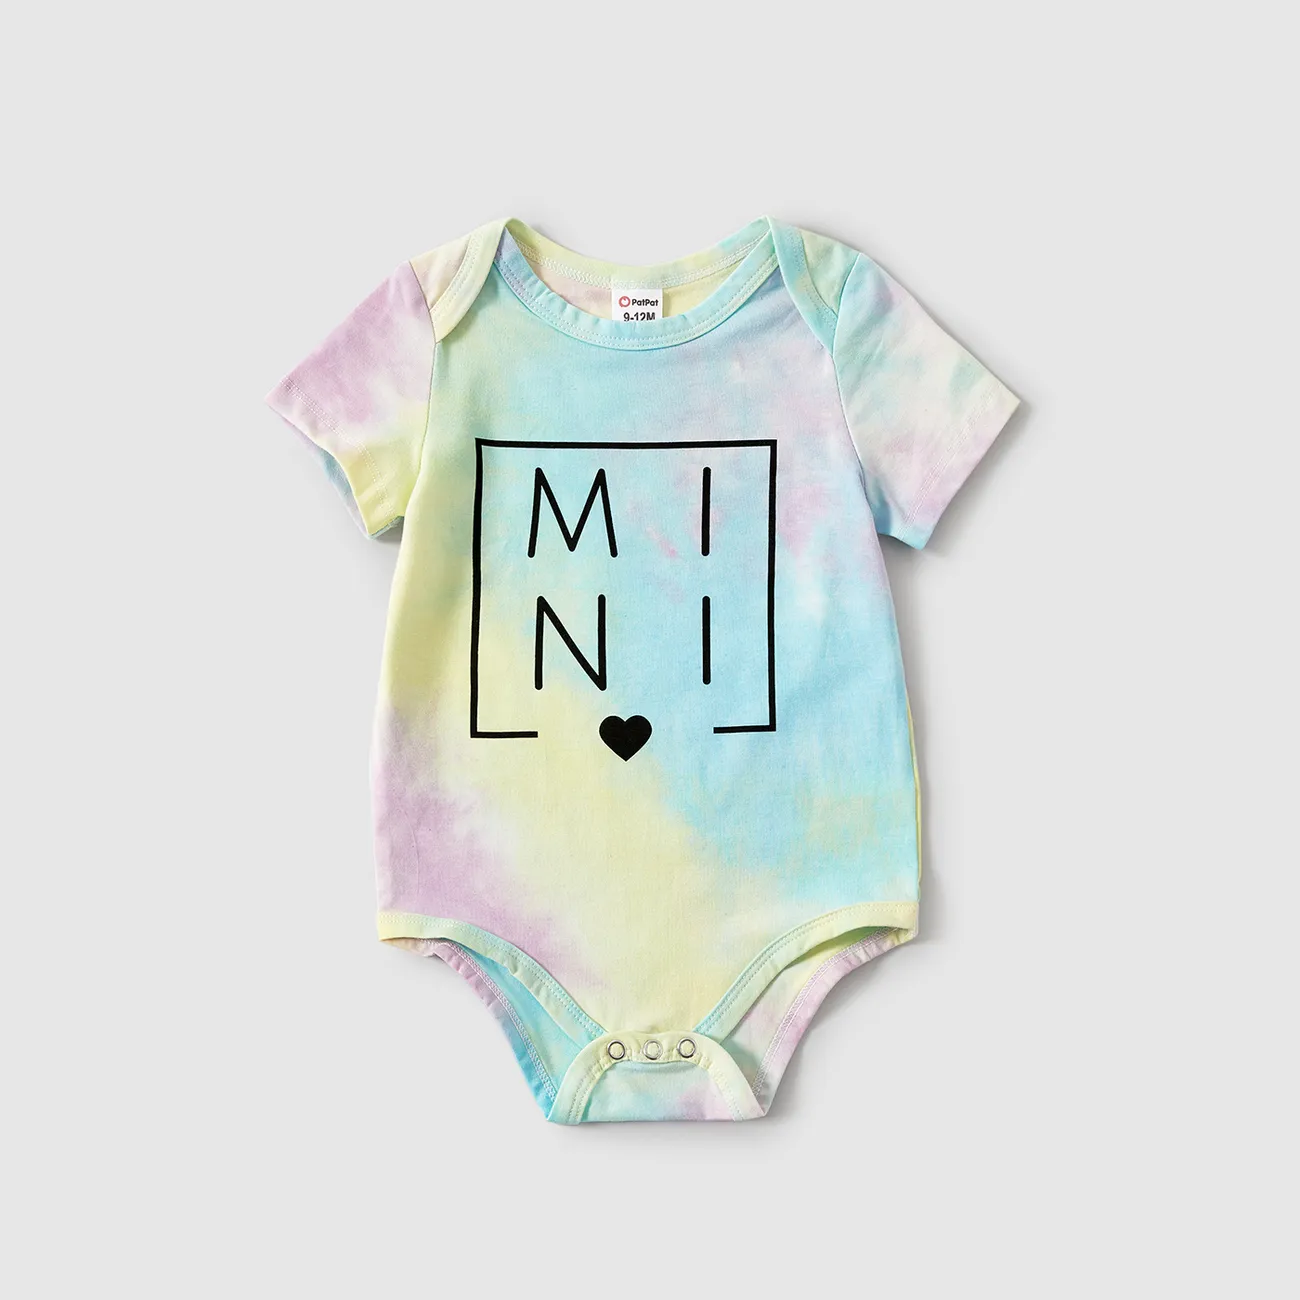 Mommy and Me 95% Cotton Letter Print Tie Dye Short-sleeve Tee  big image 1